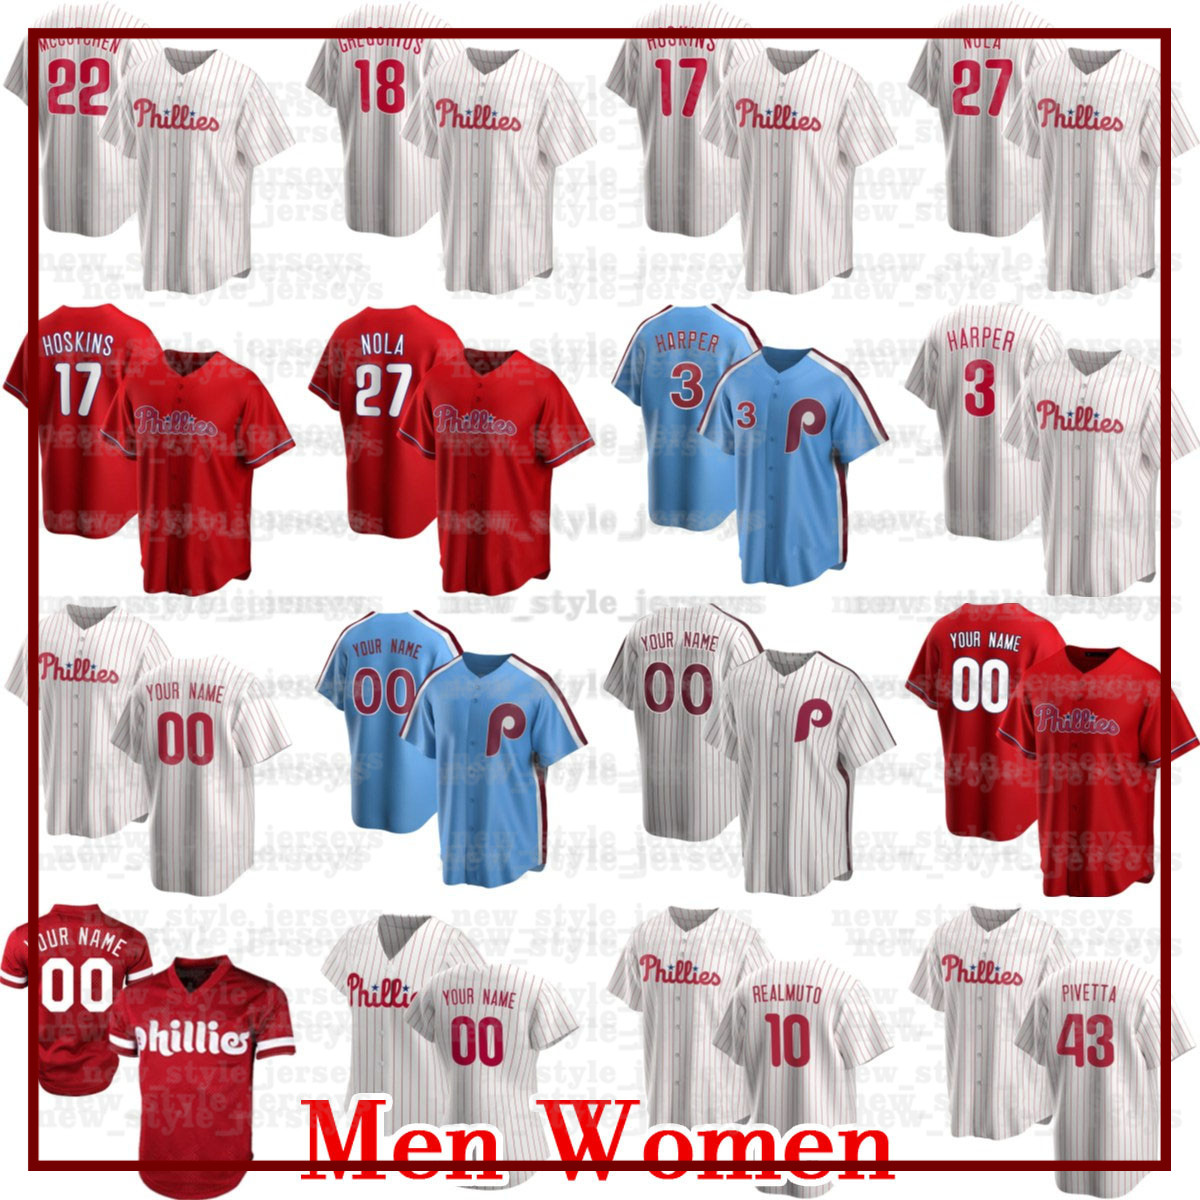 

Custom Philadelphia 2020 Phillies Jersey 3 Bryce Harpe 17 Rhys Hoskins 10 JT Realmuto Men Women Youth any name any number jersey stitched McCutchen, Men(fei cheng ren)